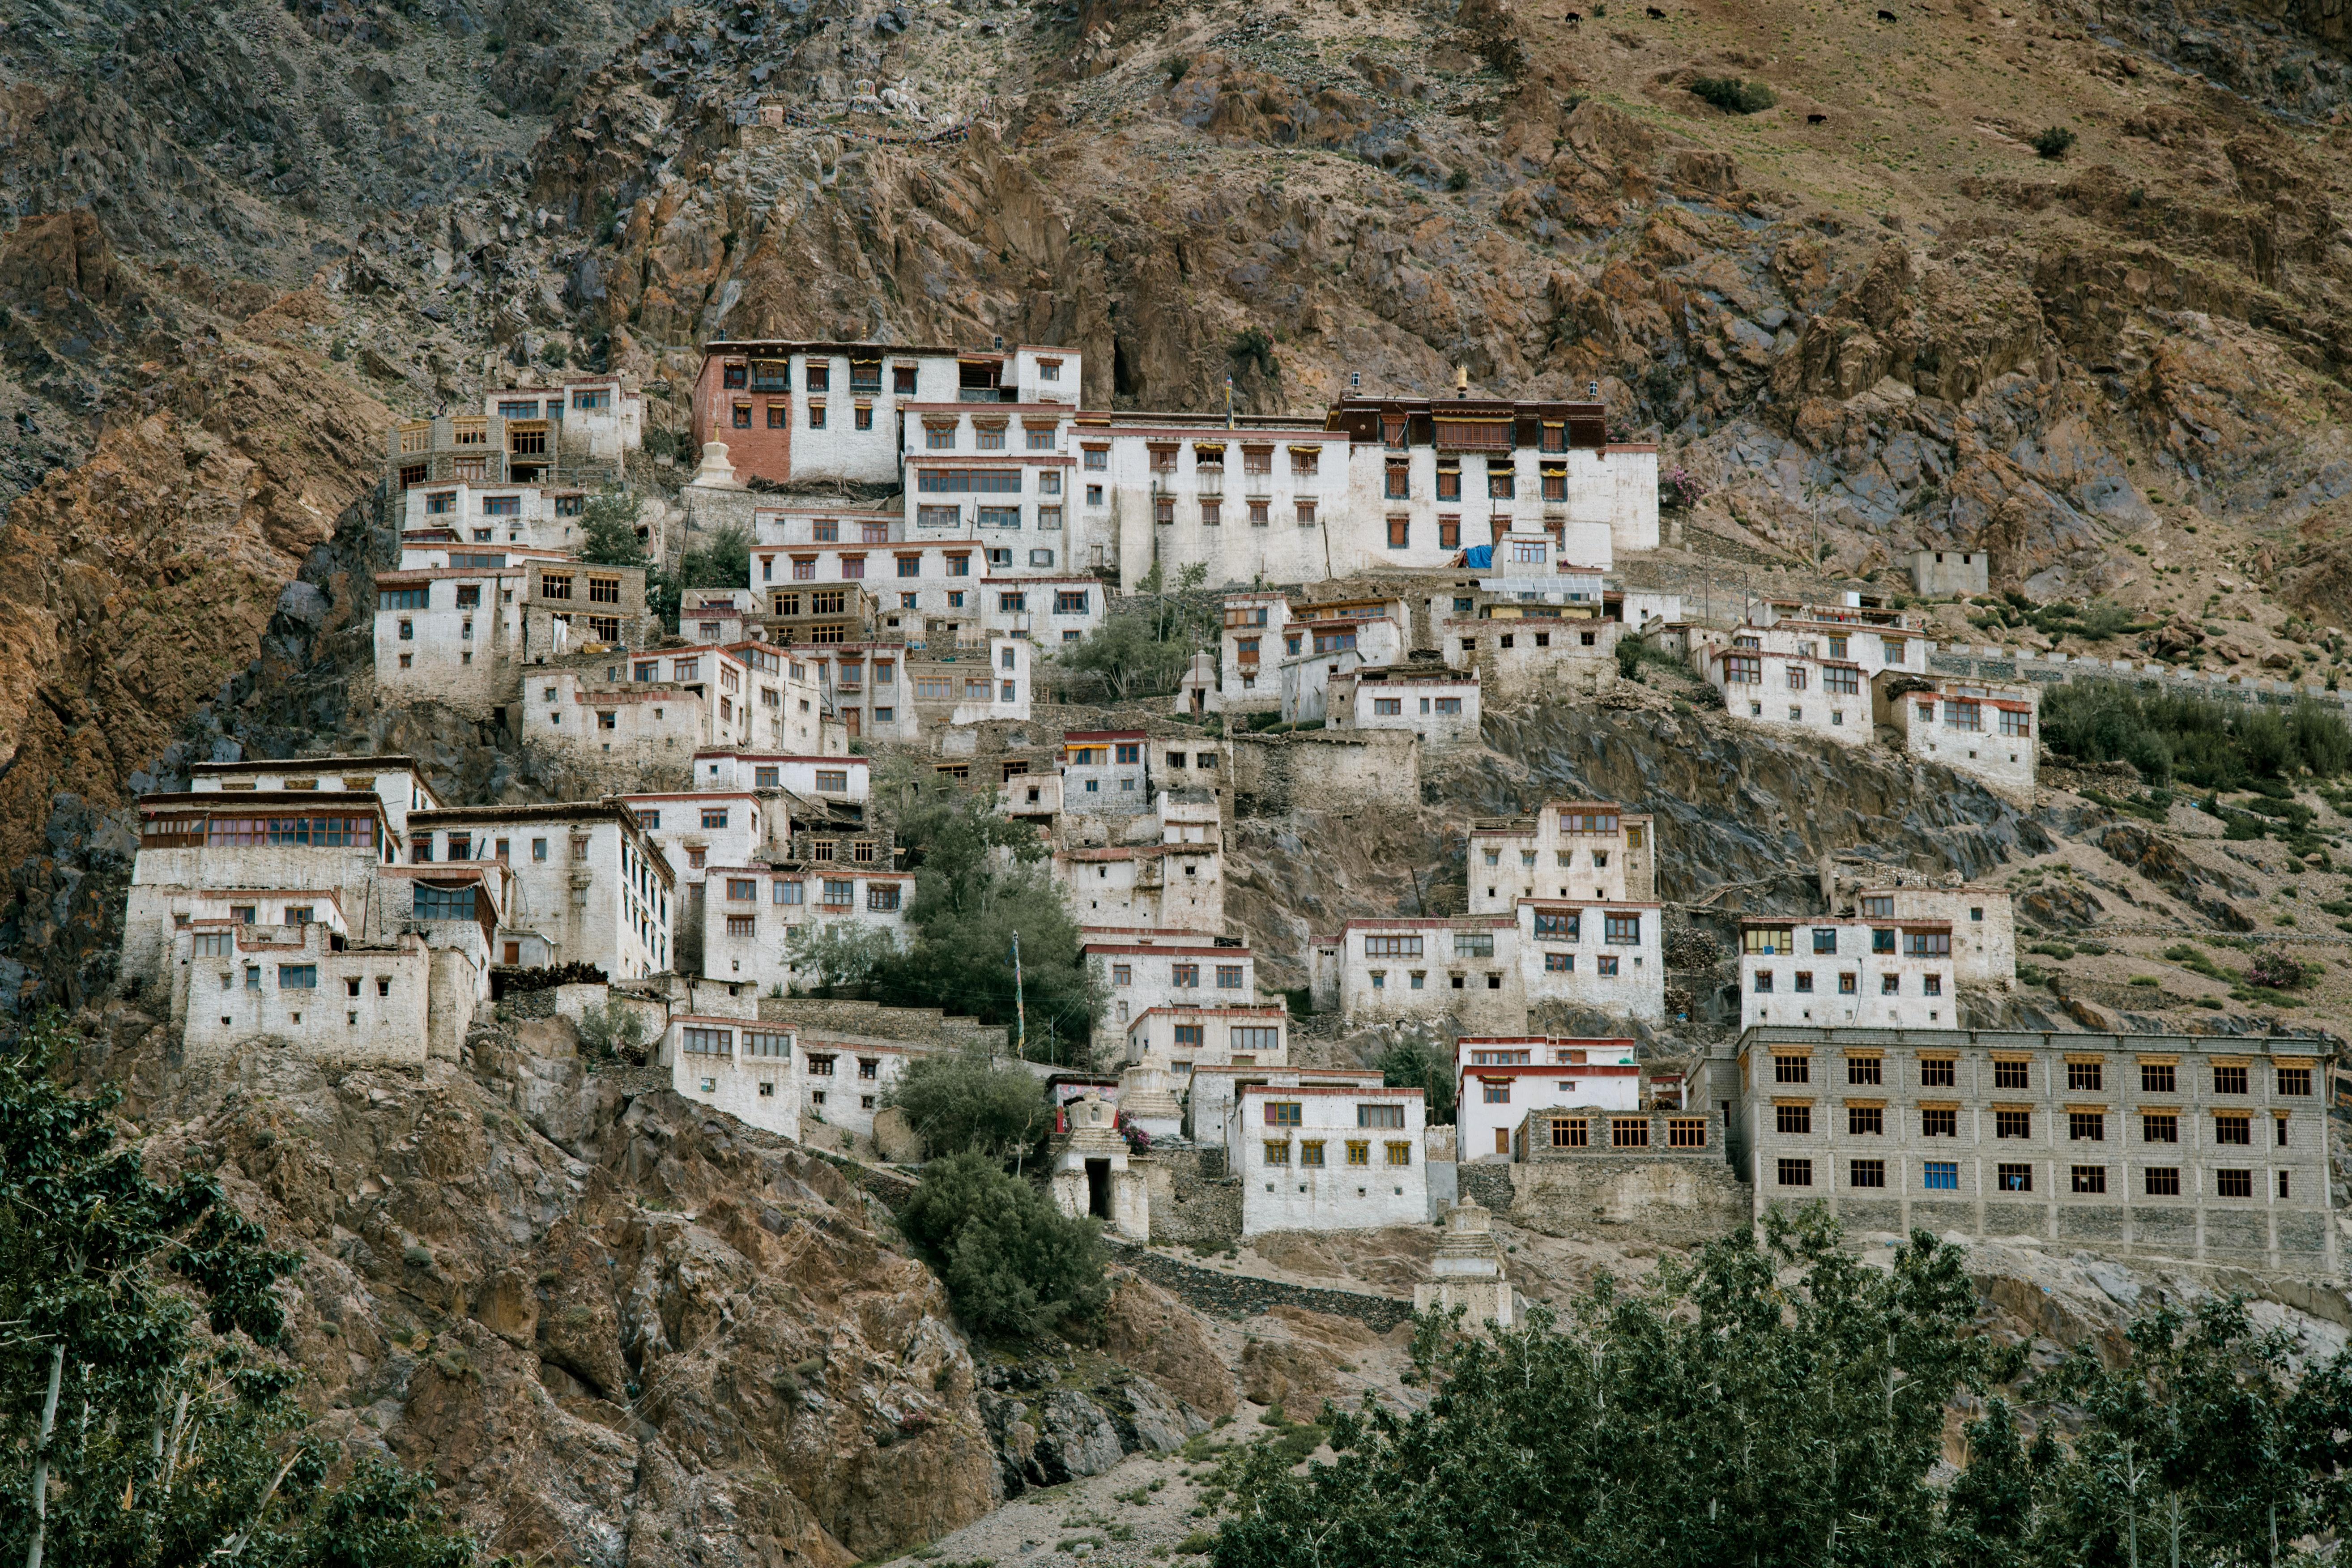 What natural disasters might occur in Tibet? 